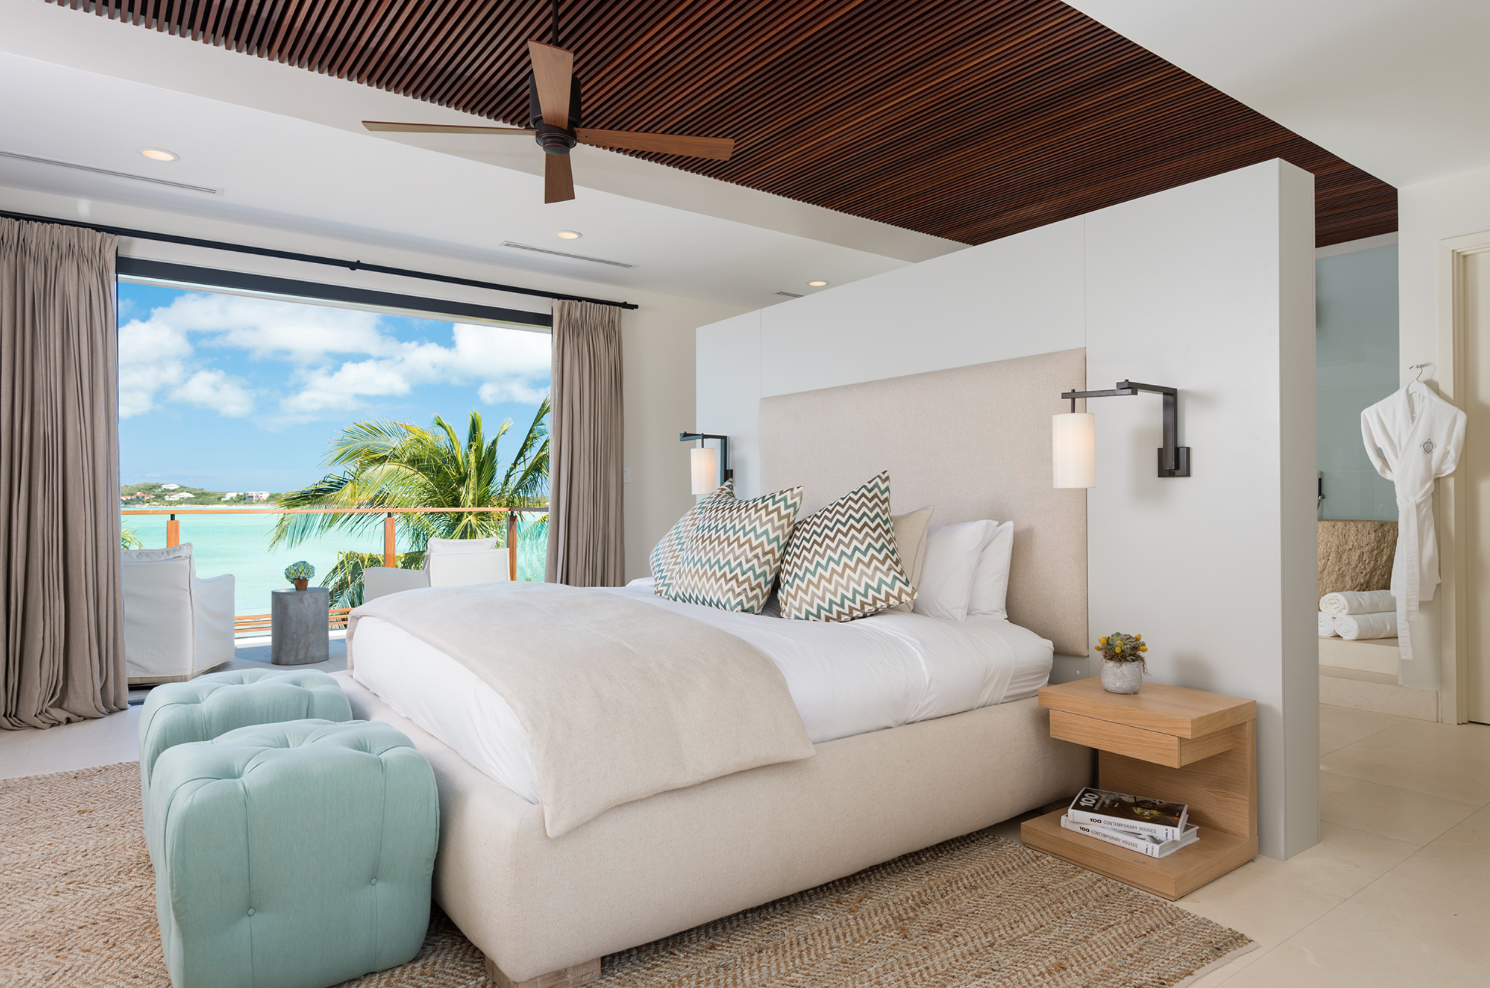 The most luxurious Turks and Caicos resort: Sleeping in at Turtle Tail Estates